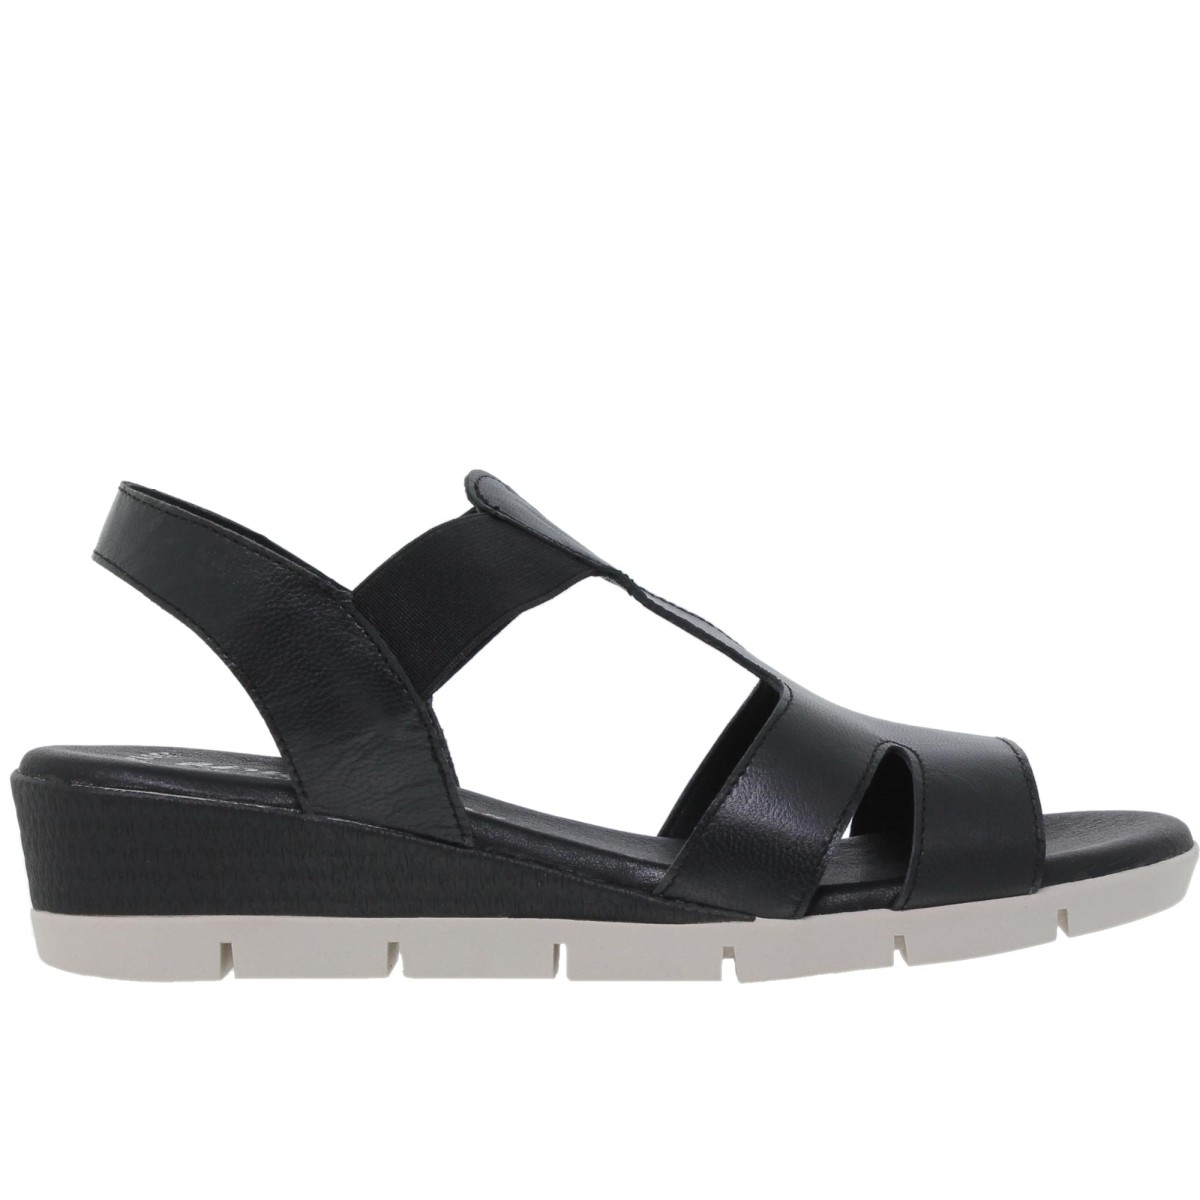 Black Leather Sandals by Amelie